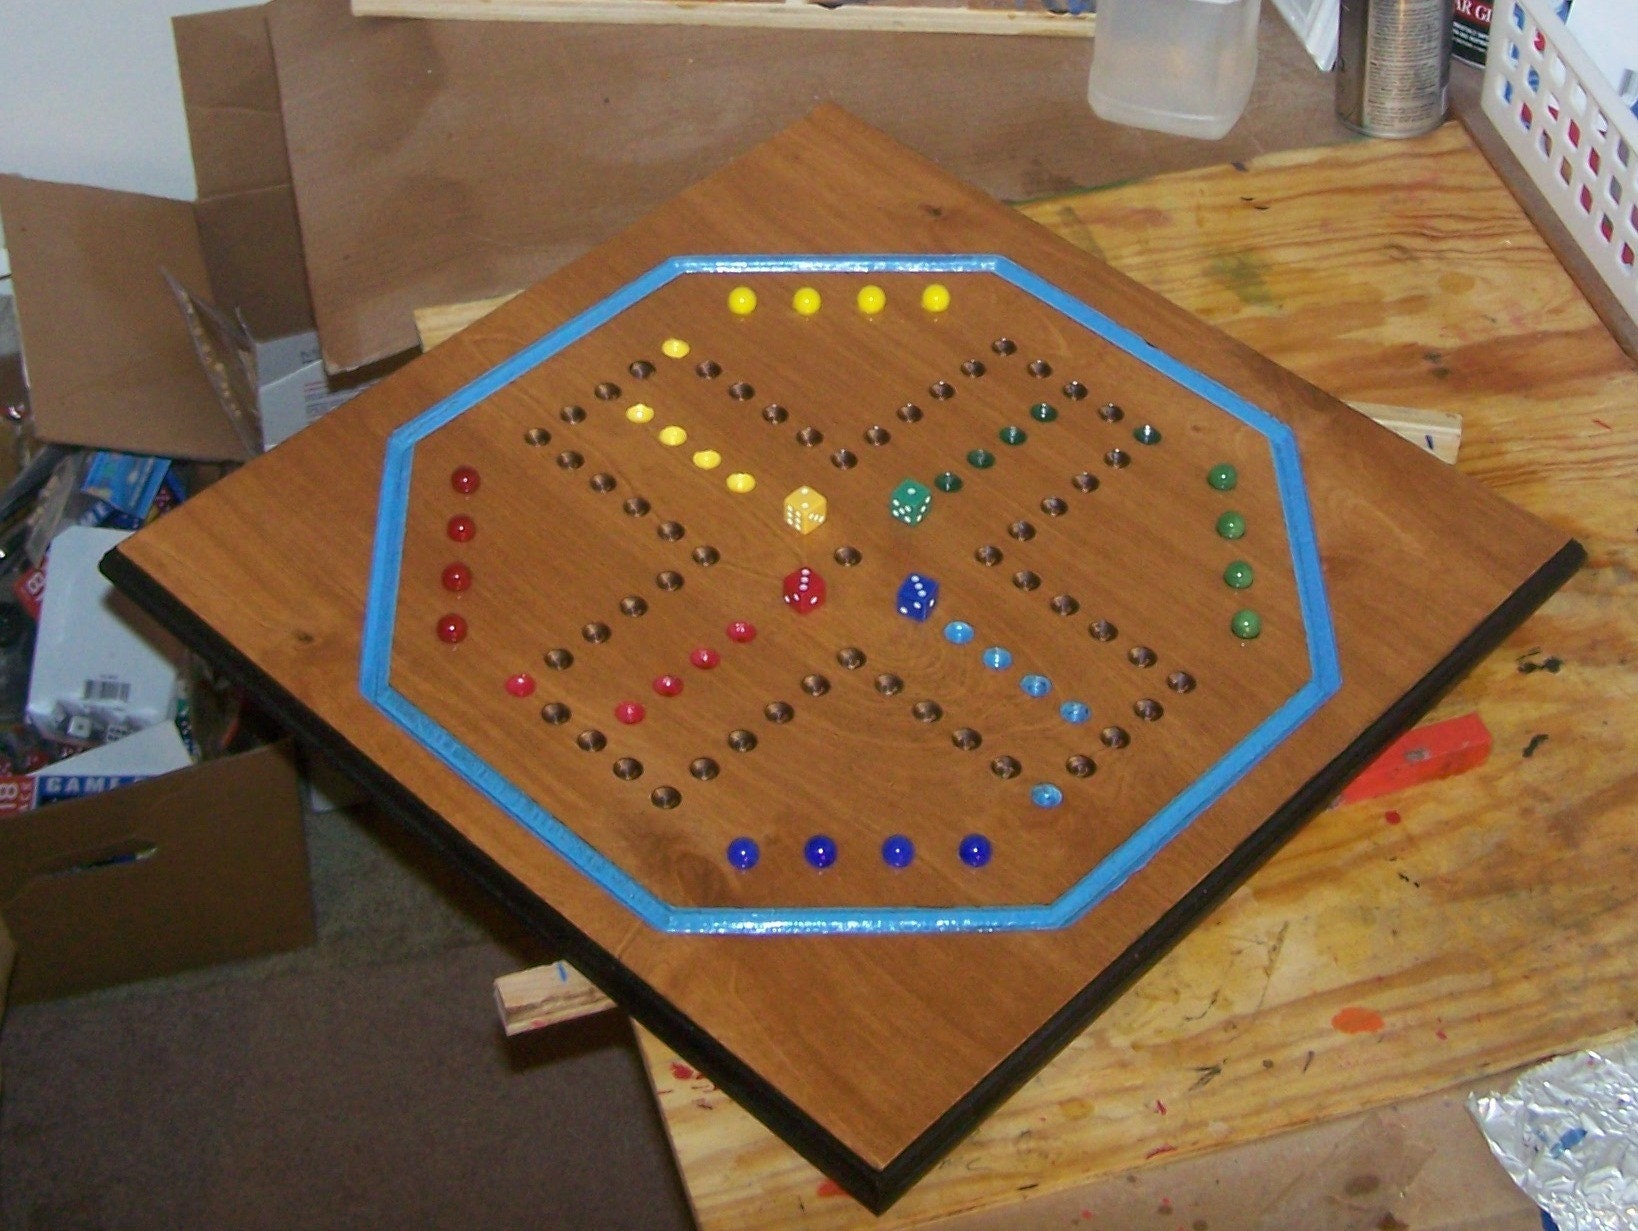 Fun Aggravation board game Wahoo w marbles n dice sign d by